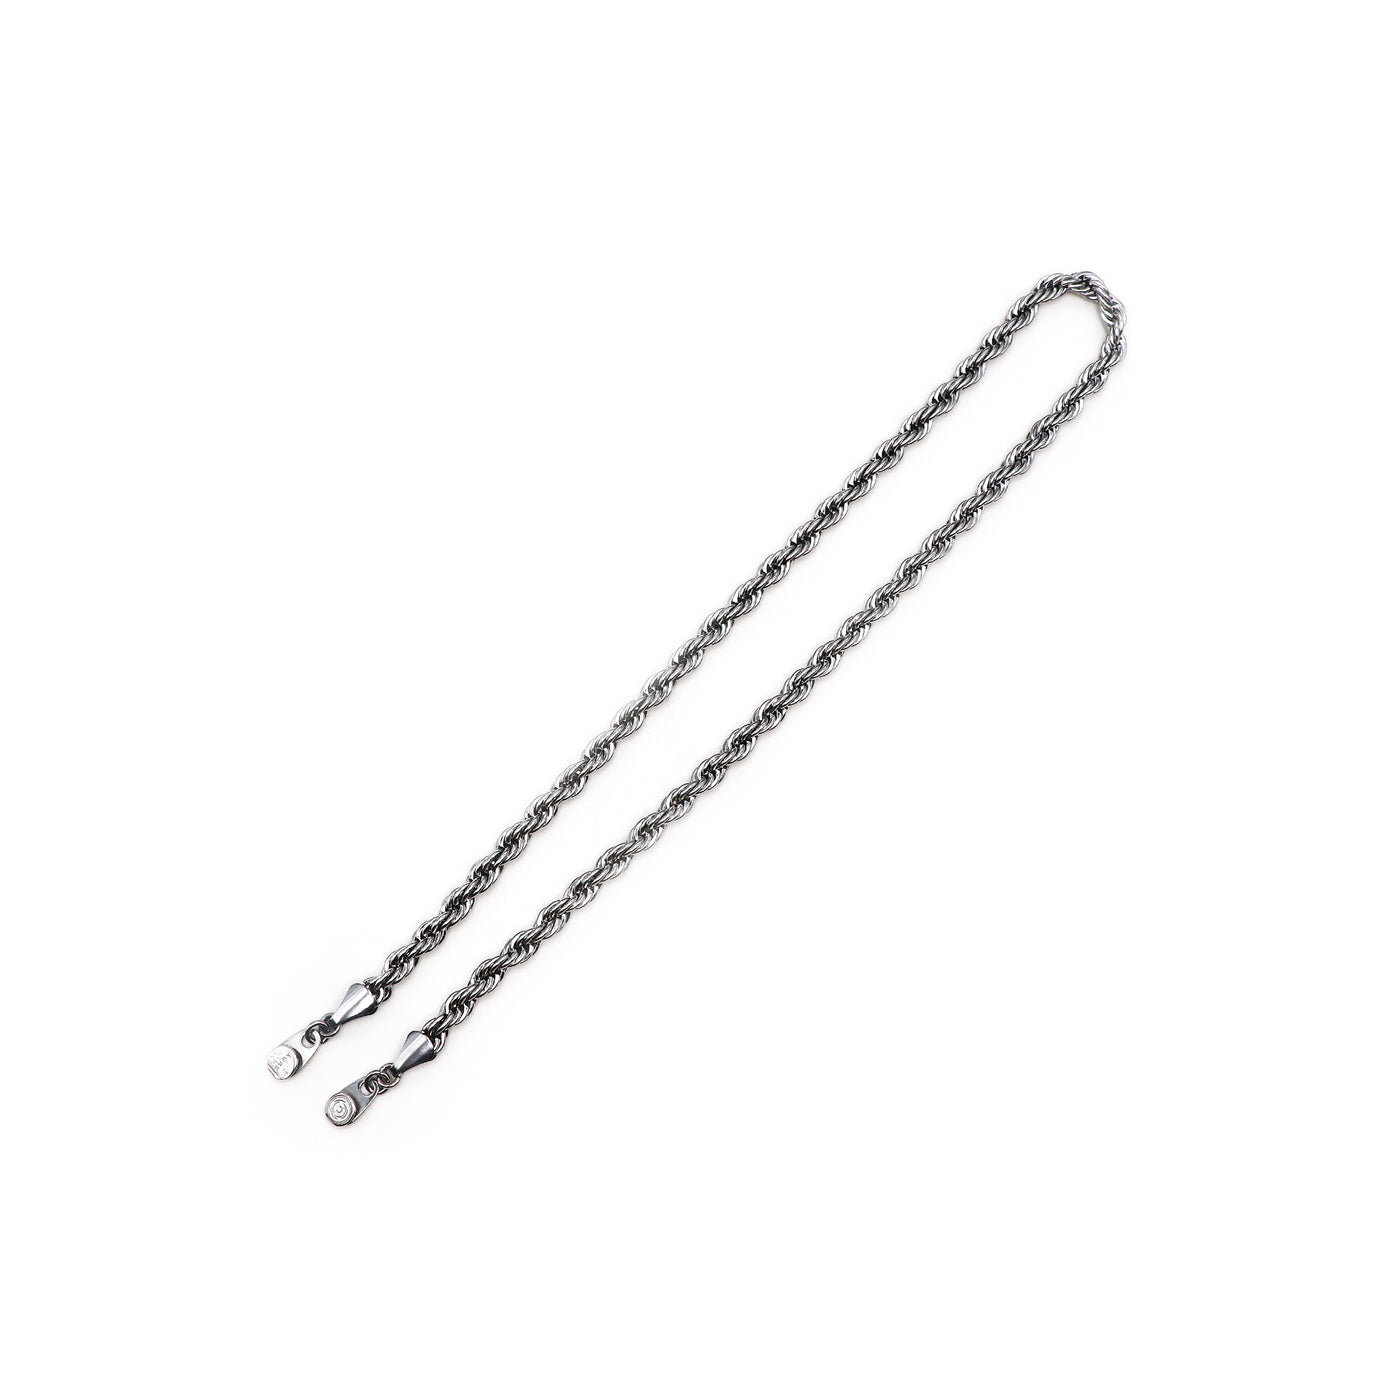 Thin Necklace Rope Chain Adapter